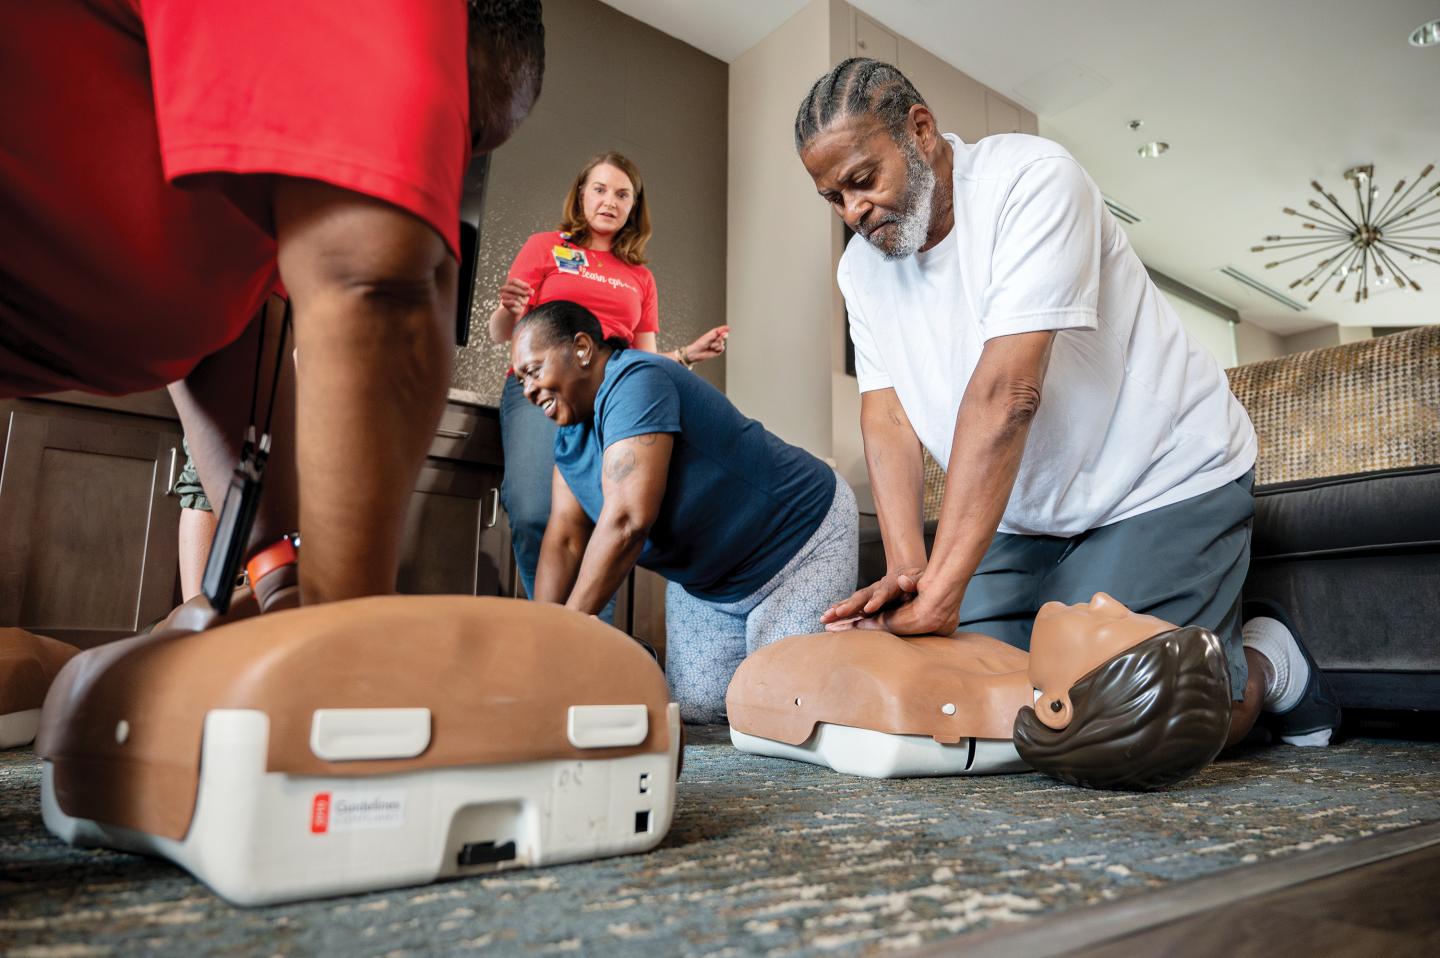 Local residents take part in a community-based CPR workshop